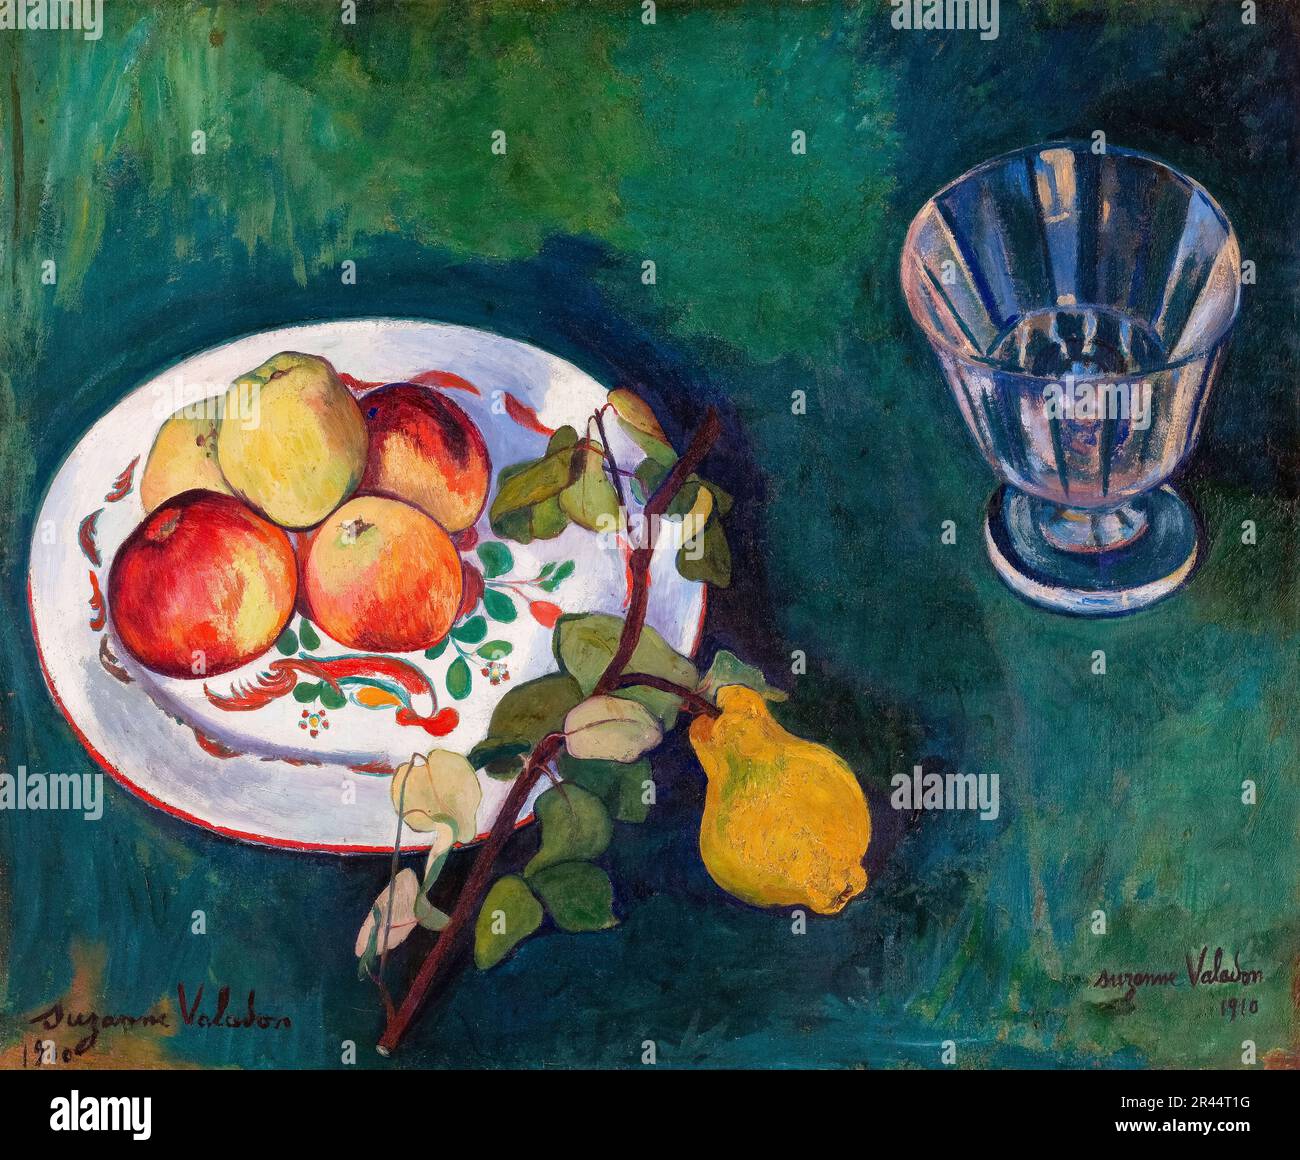 Suzanne Valadon, Still Life with fruit and Glass, peinture 1910 Banque D'Images